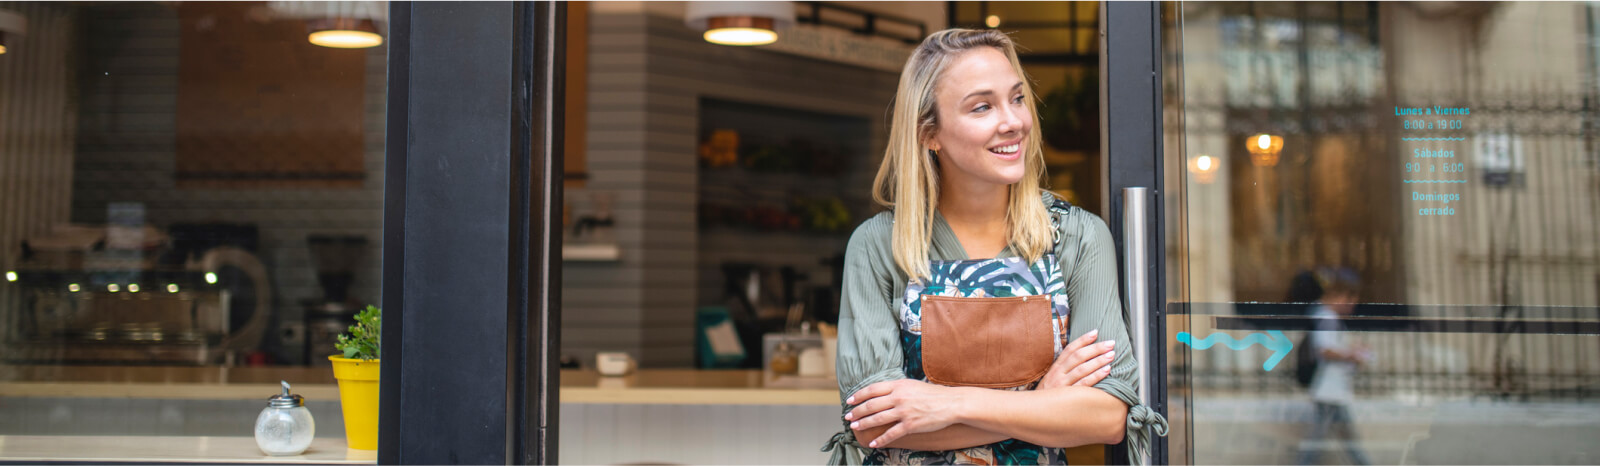 Woman wearing apron and casually leaning on business front